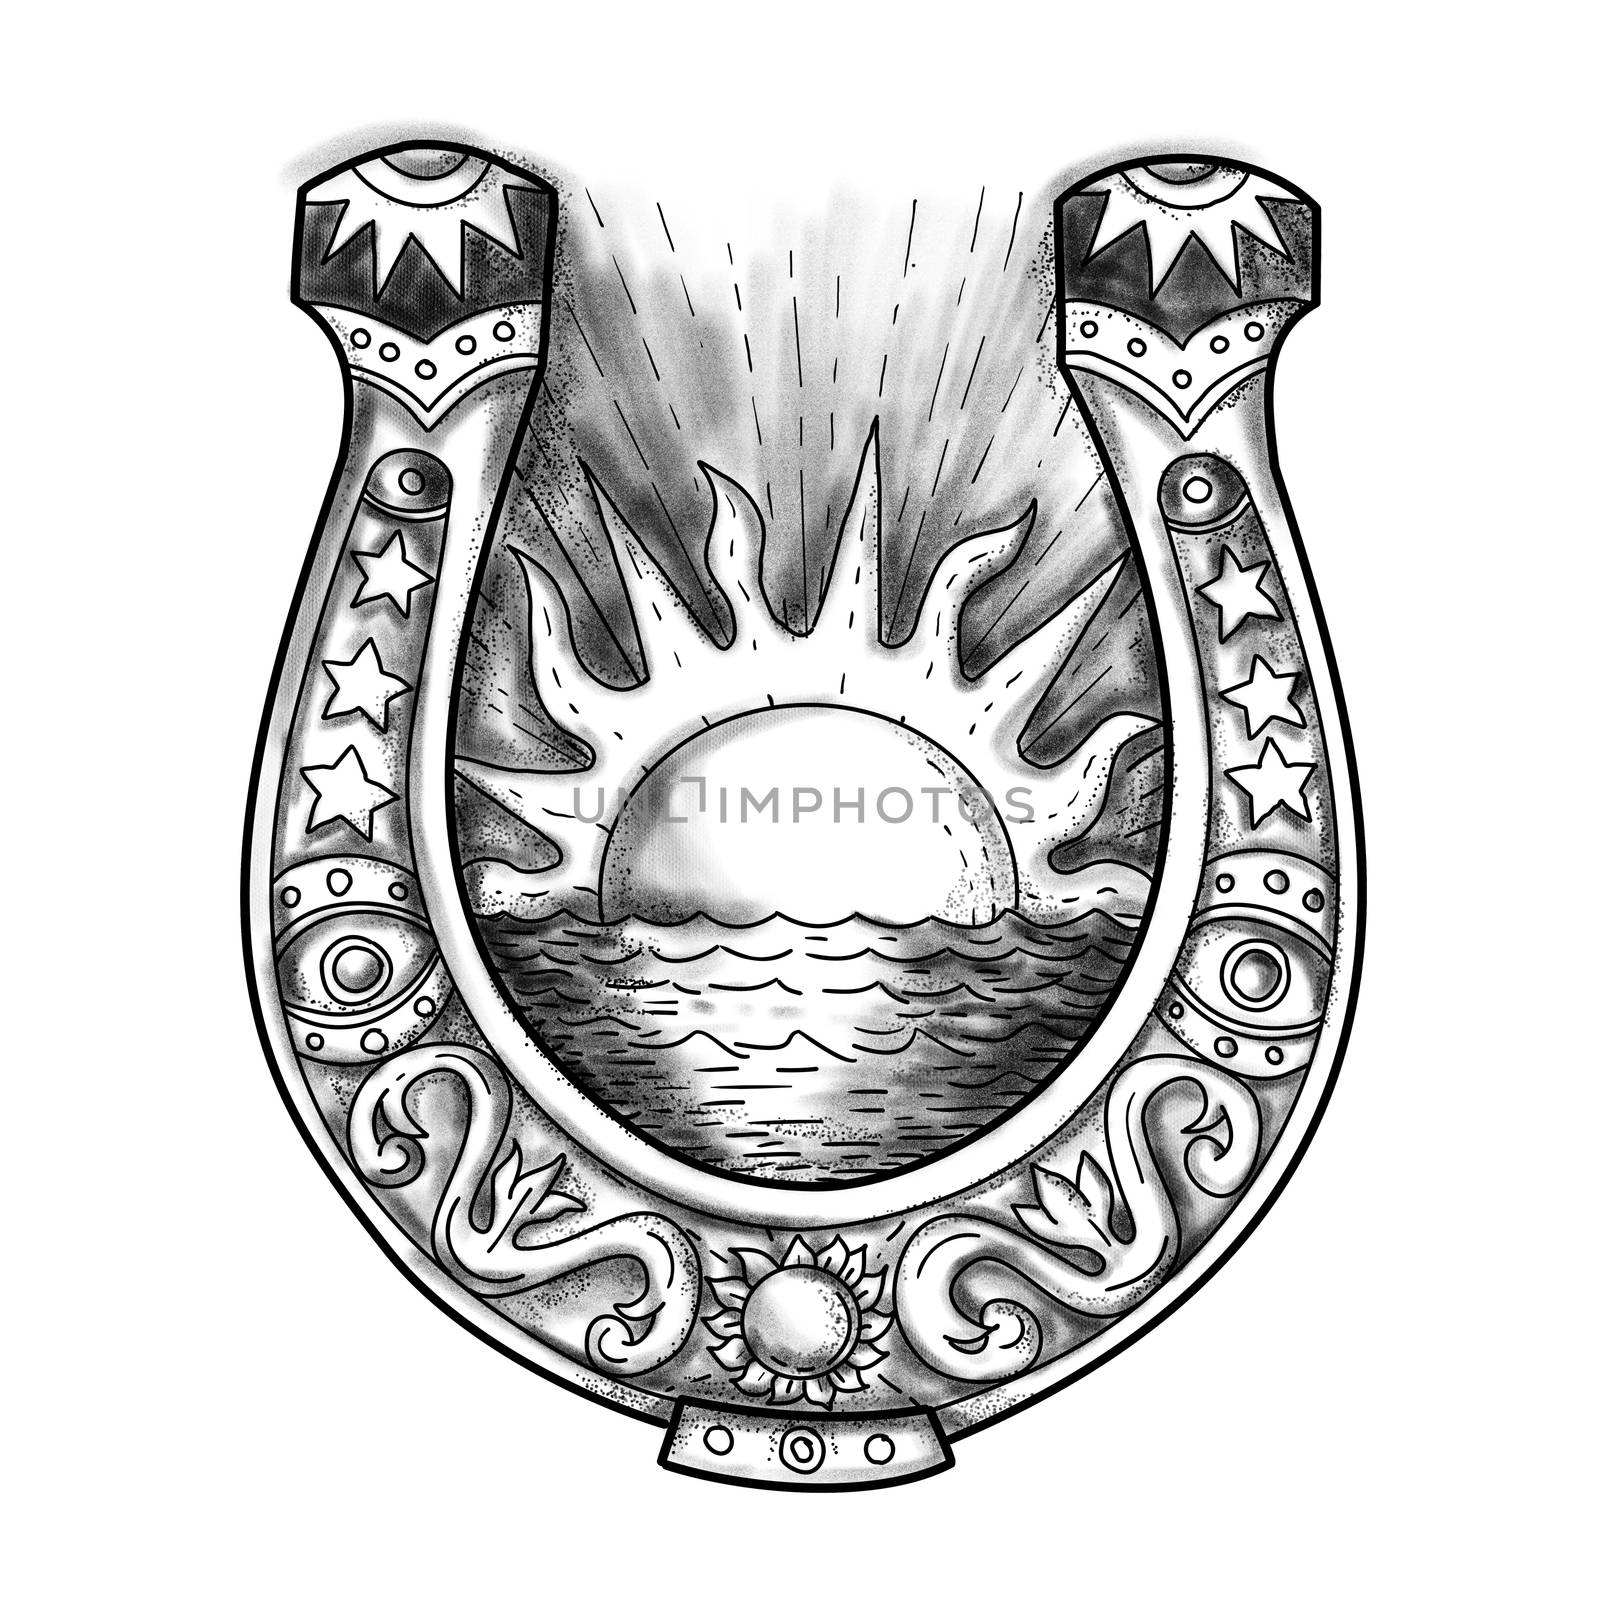 Tattoo style illustration of am embellished and decorative horseshoe with shining sun and sea in the middle on isolated background.